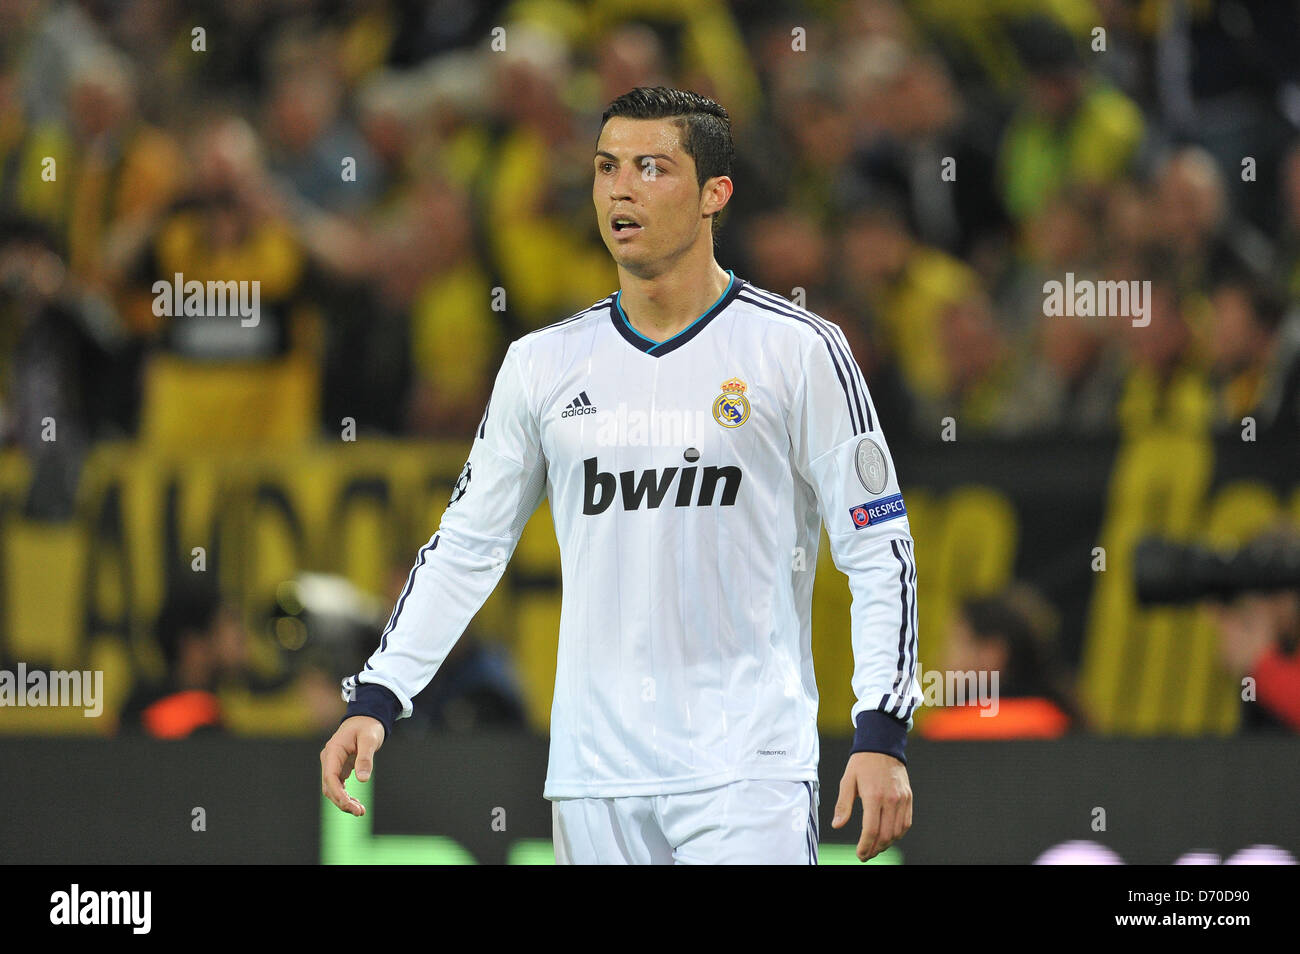 Dortmund Germany 24 April 13 Madrid S Cristiano Ronaldo Stands During The Uefa Champions League Semi Final First Leg Soccer Match Between Borussia Dortmund And Real Madrid At Bvb Stadium Dortmund In Dortmund Germany